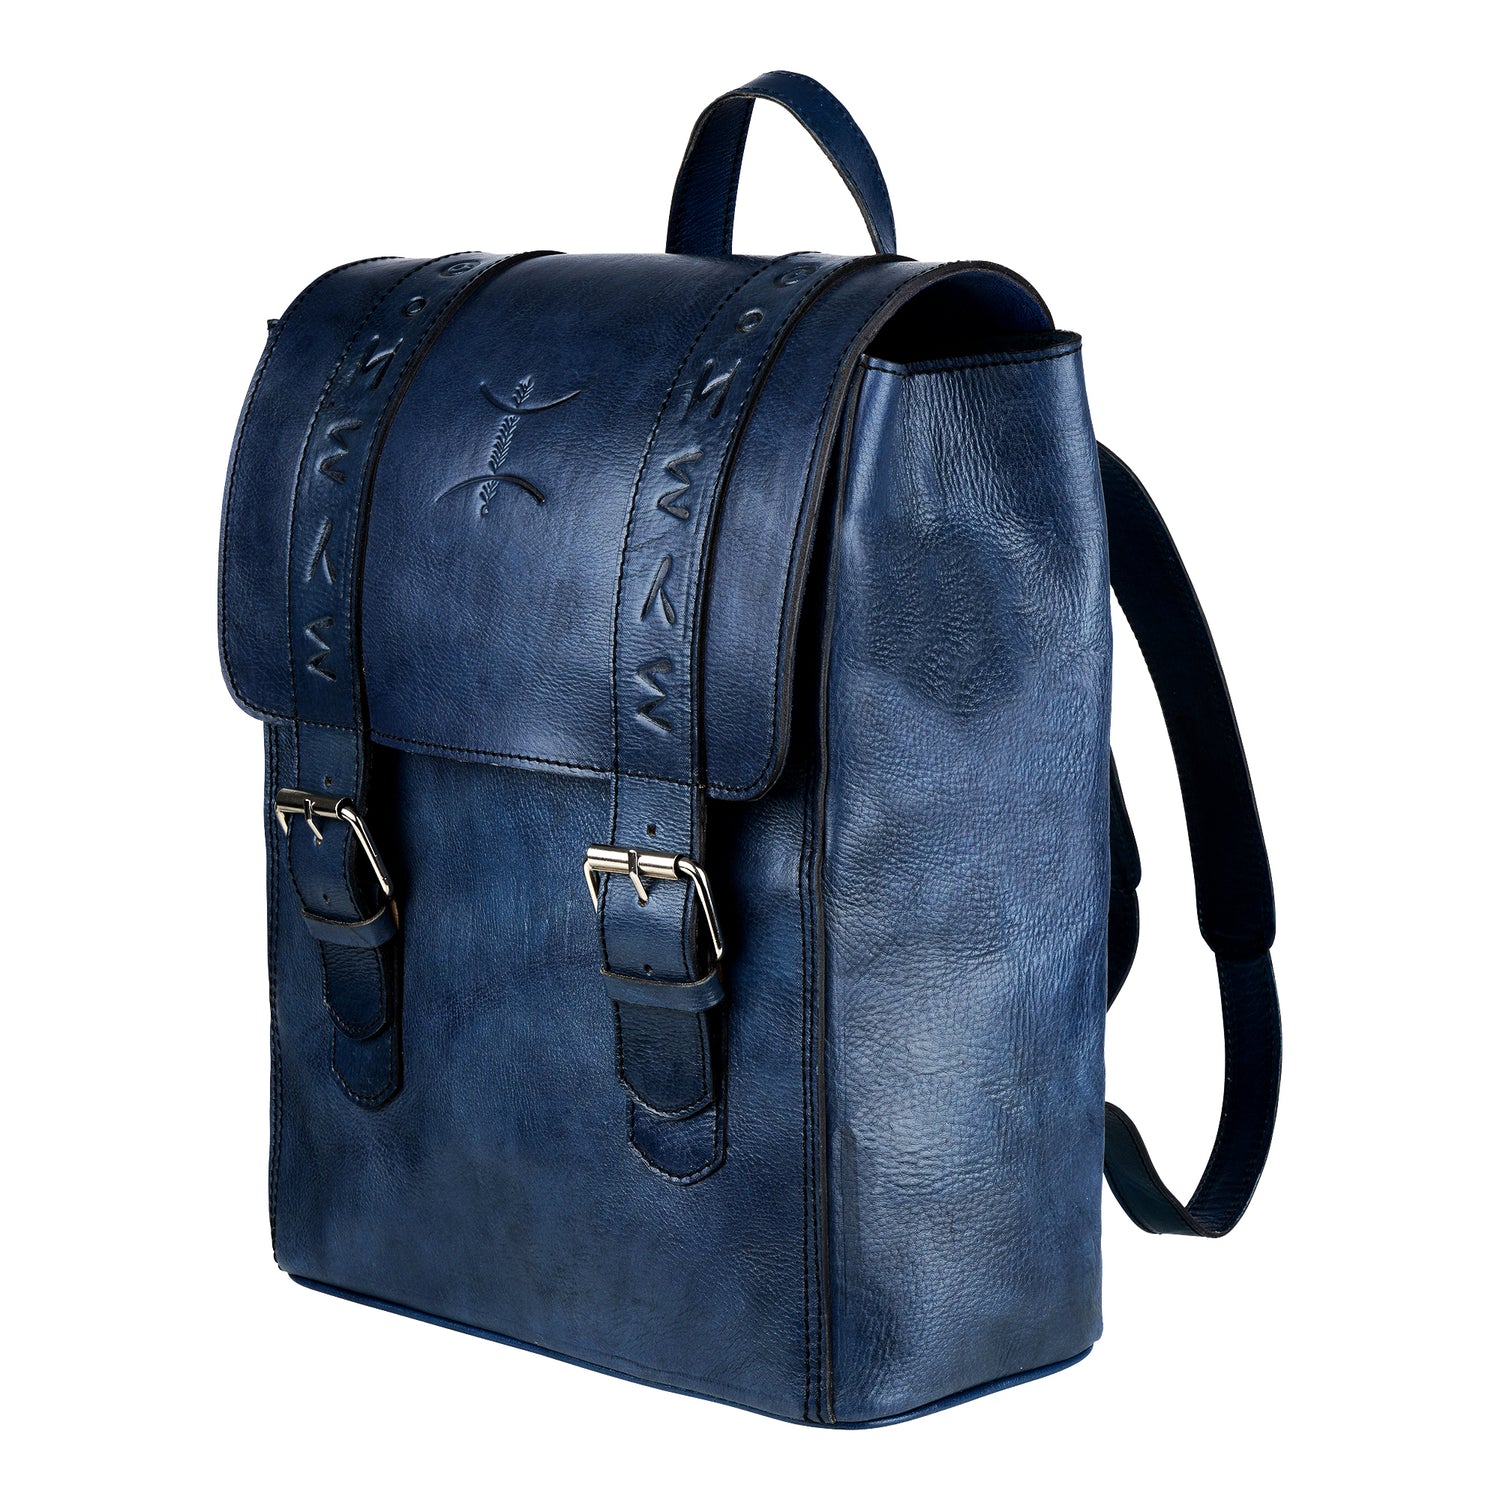 Handmade in Blue Indigo: Each backpack is carefully crafted by skilled artisans, ensuring attention to detail and a unique touch, all set in a mesmerizing blue indigo hue.